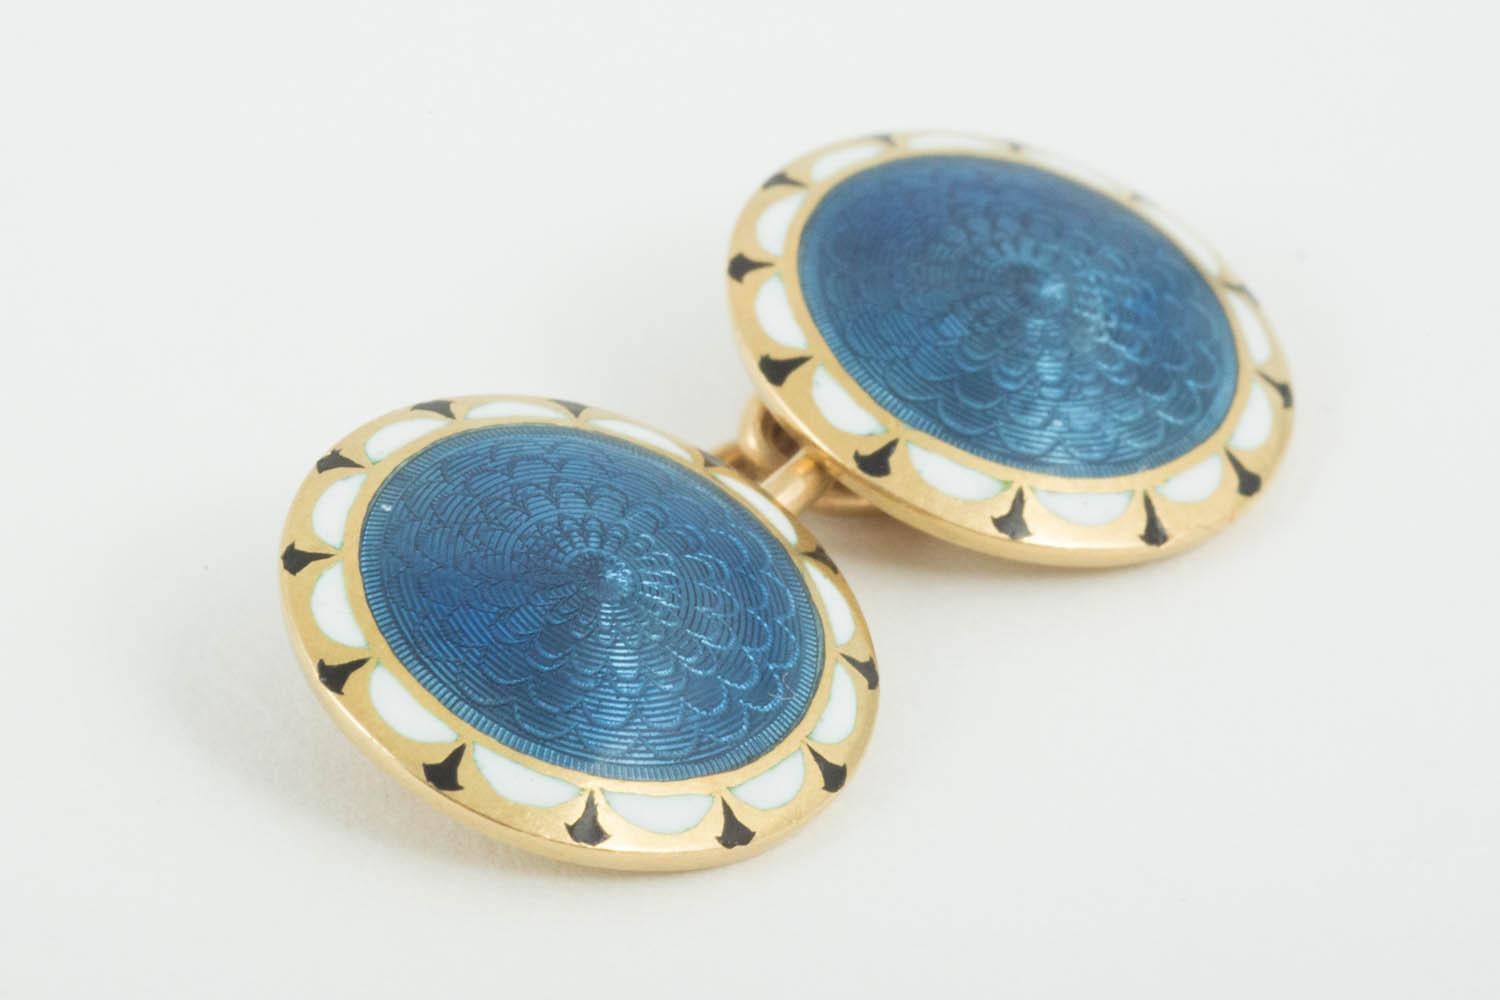 Edwardian Cufflinks 18 Carat Gold with Blue, Black and White Enamel, English, circa 1910 For Sale